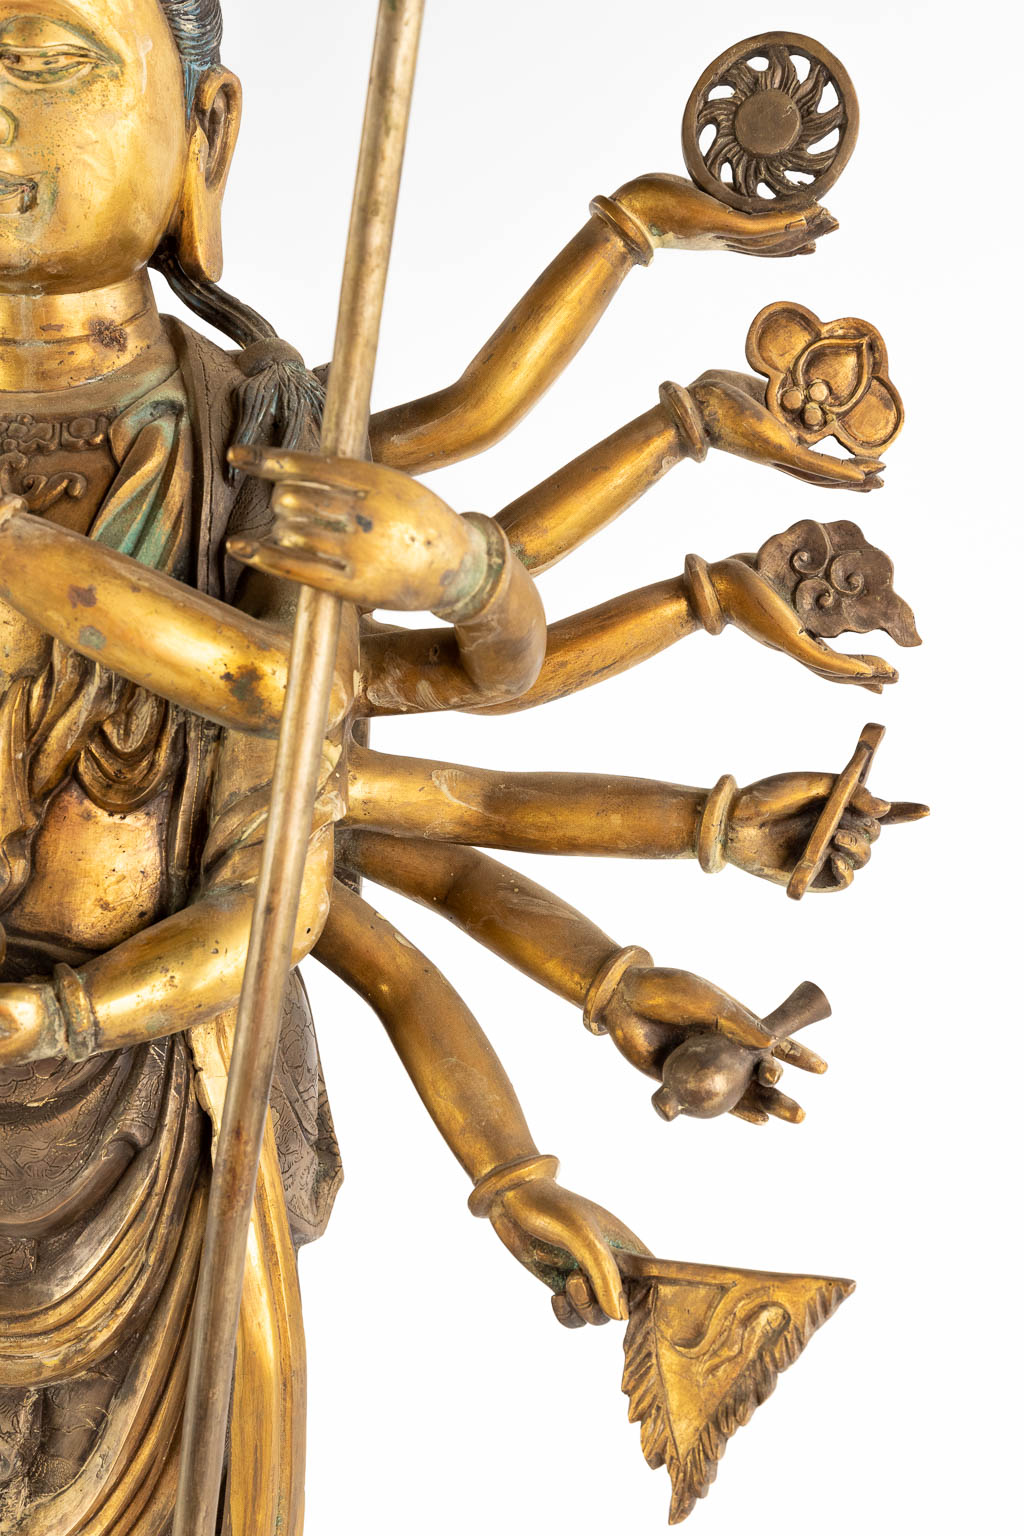 A Bodhisattva or GuanYin with 1000 arms, bronze with 18 arms and Taoist symbols. 20th C. (W:47 x H:78 cm)